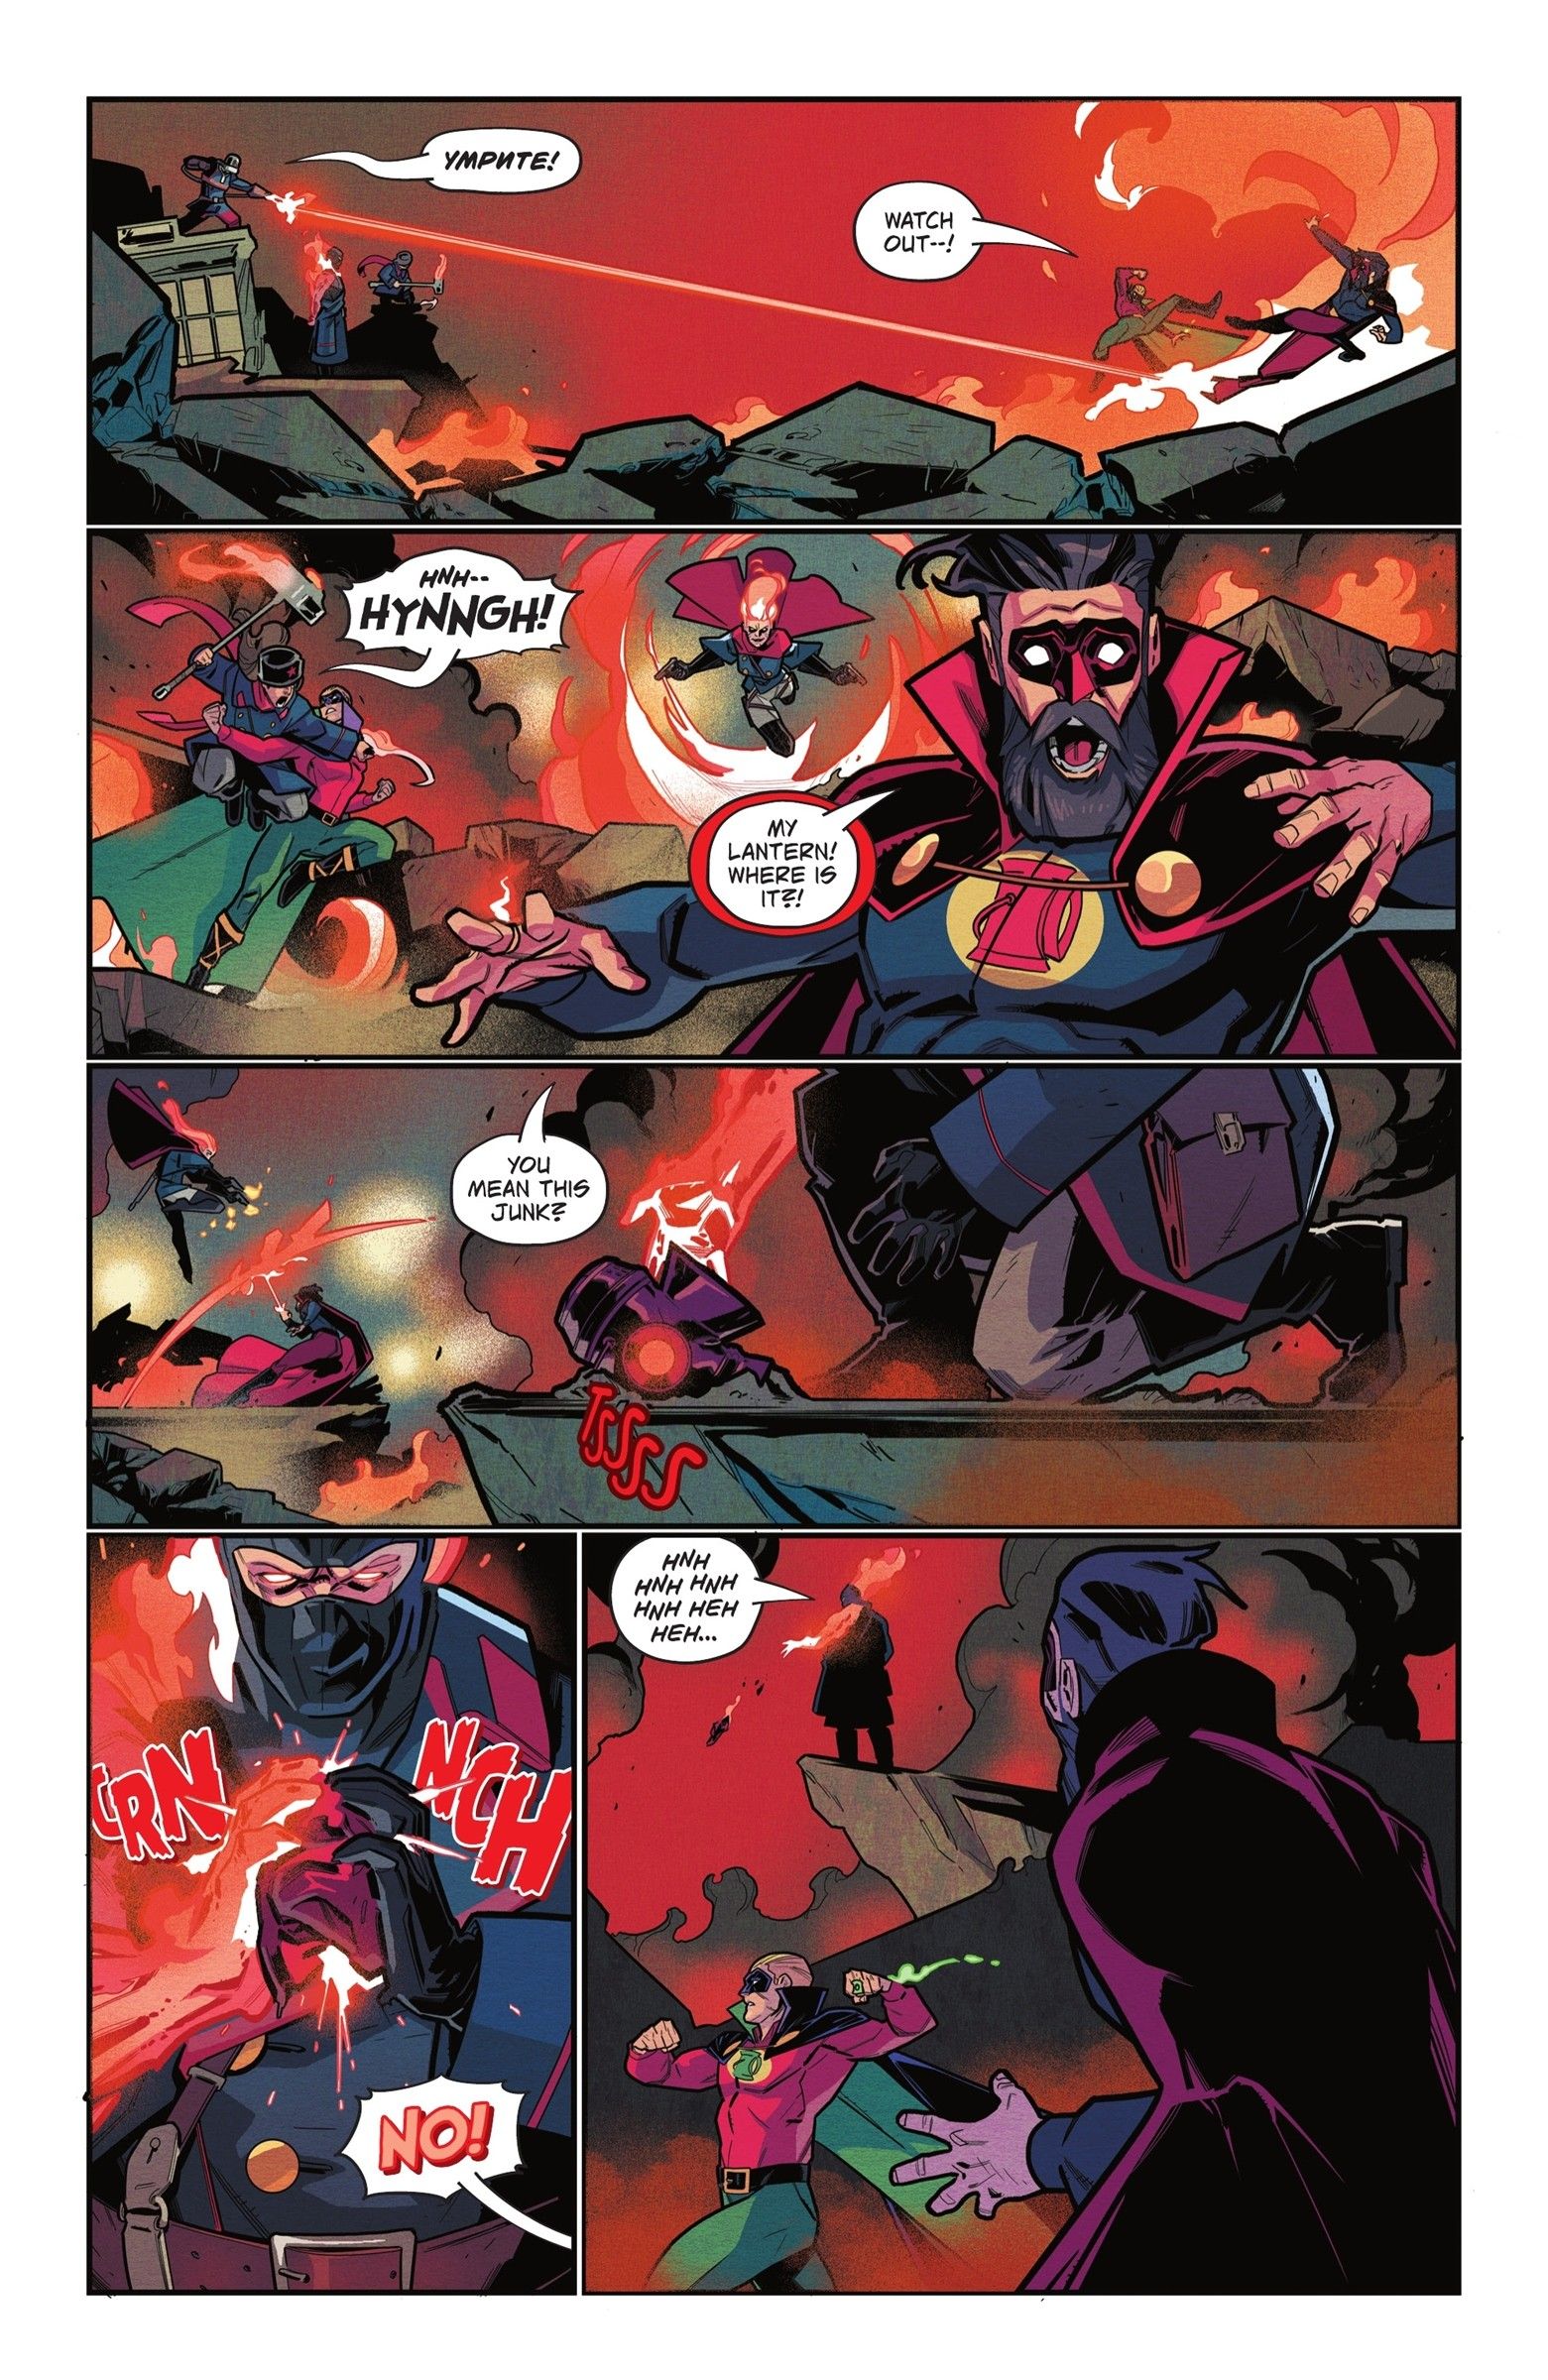 Five panels of the Crimson Host destroying the Red Lantern's lamp.